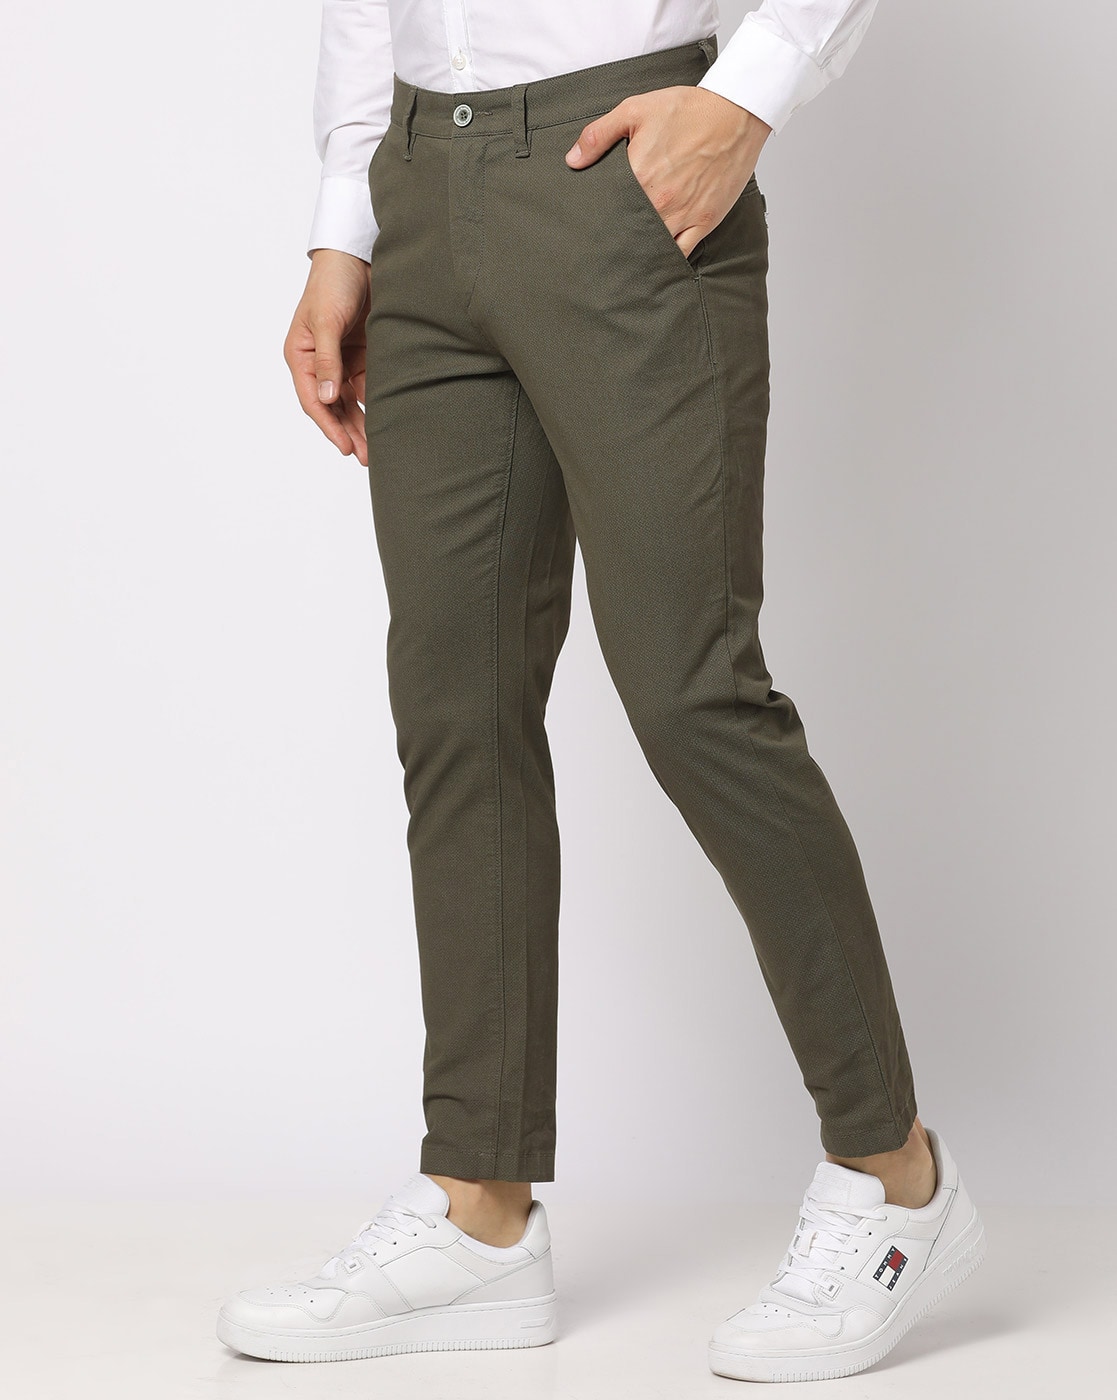 Buy parallel trousers for men in India @ Limeroad